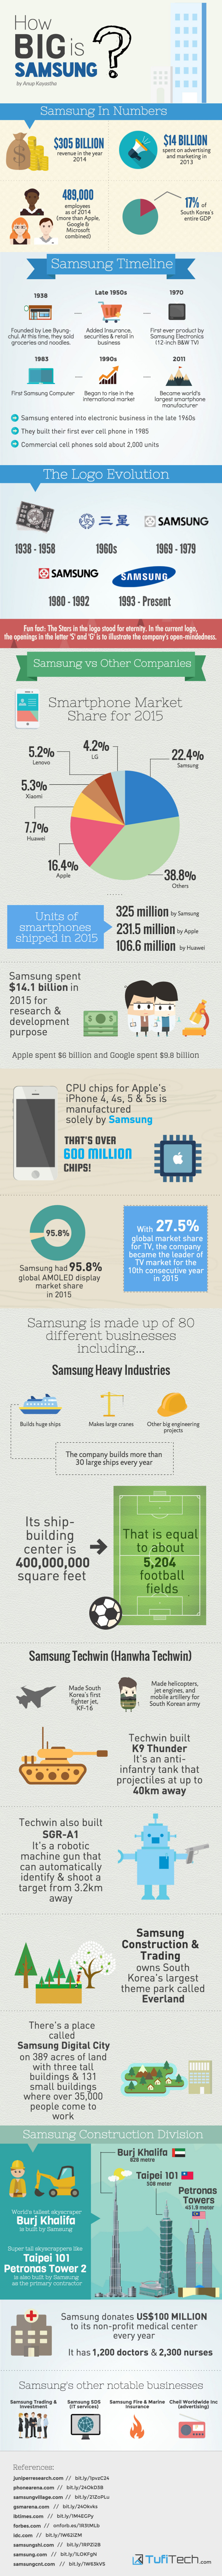 How-Big-Is-Samsung-Infographic